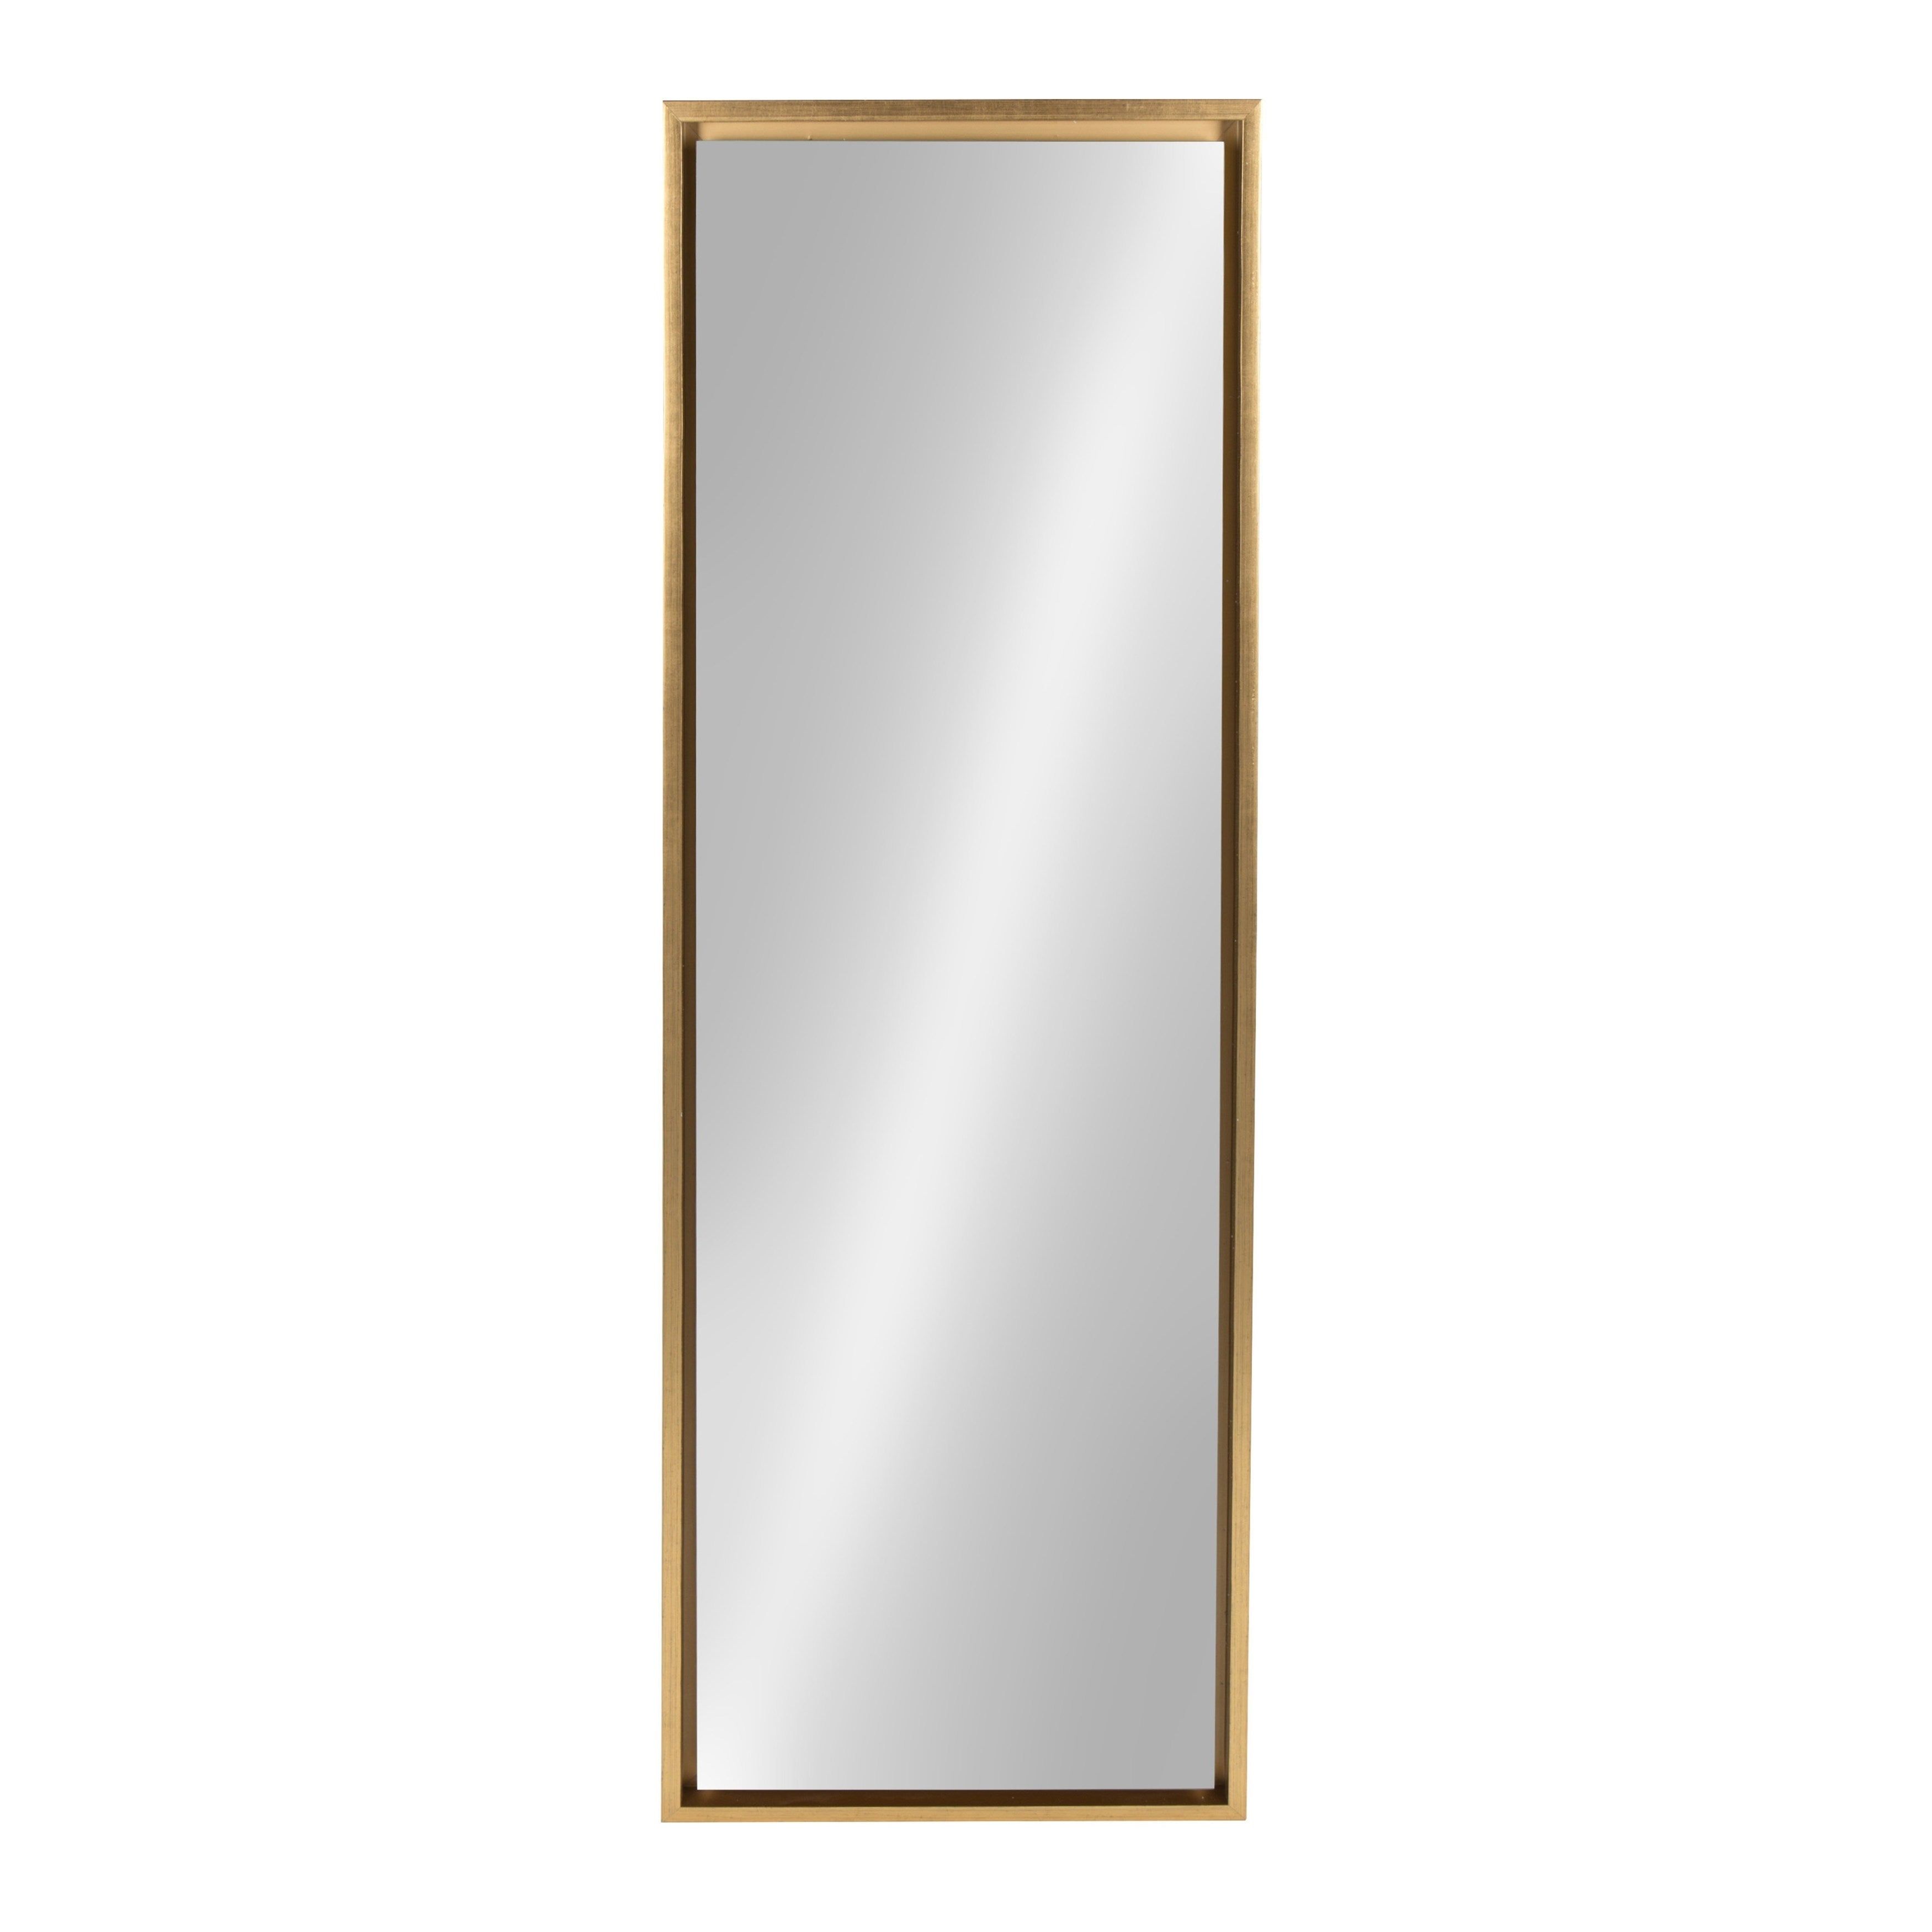 Wood Mirrors | Shop Online At Overstock With Longwood Rustic Beveled Accent Mirrors (View 28 of 30)